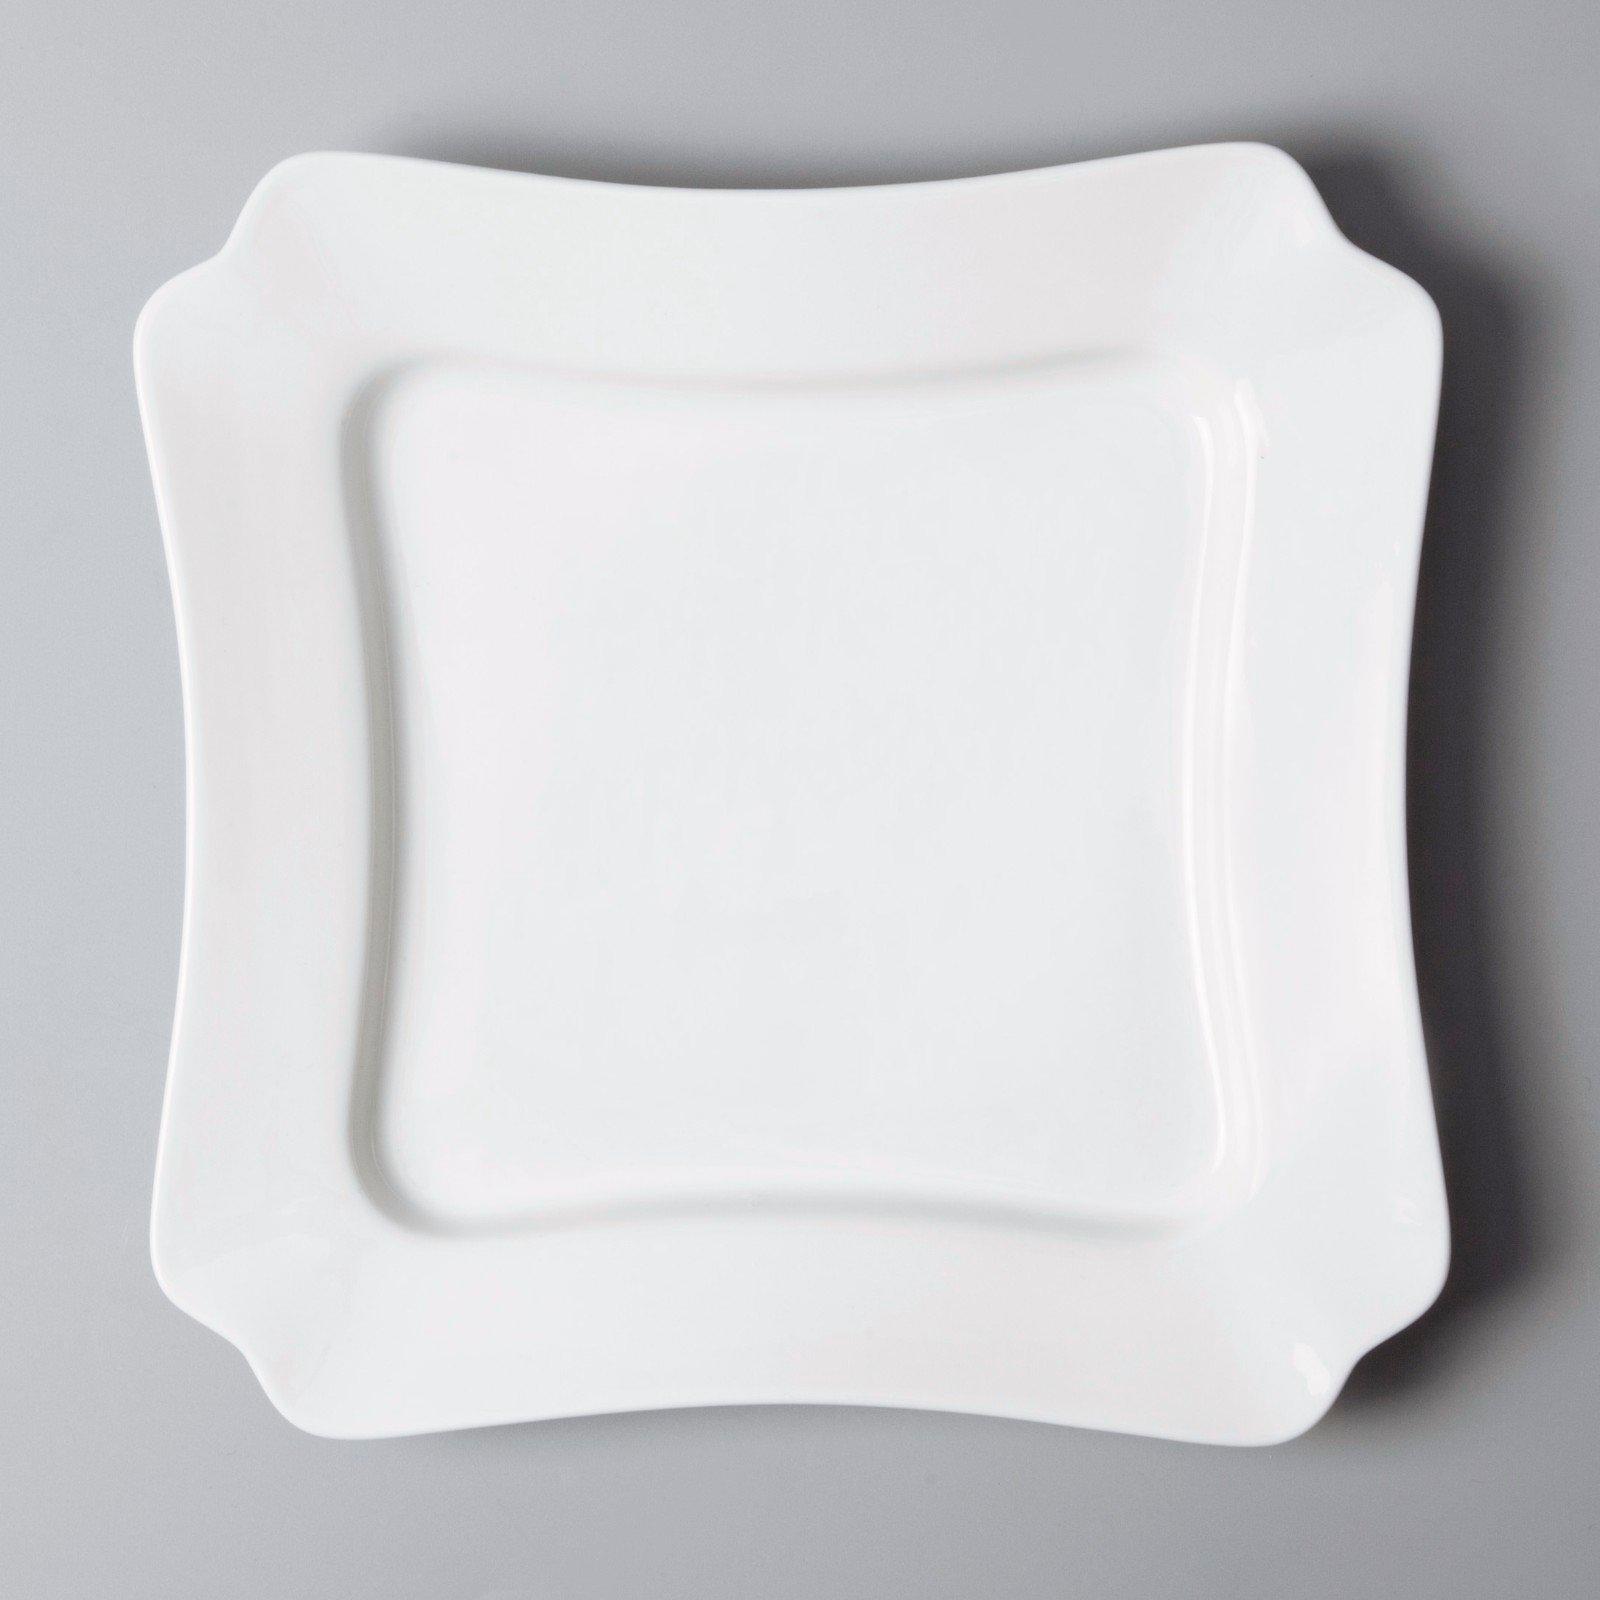 modern commercial restaurant plates french style from China for restaurant-2